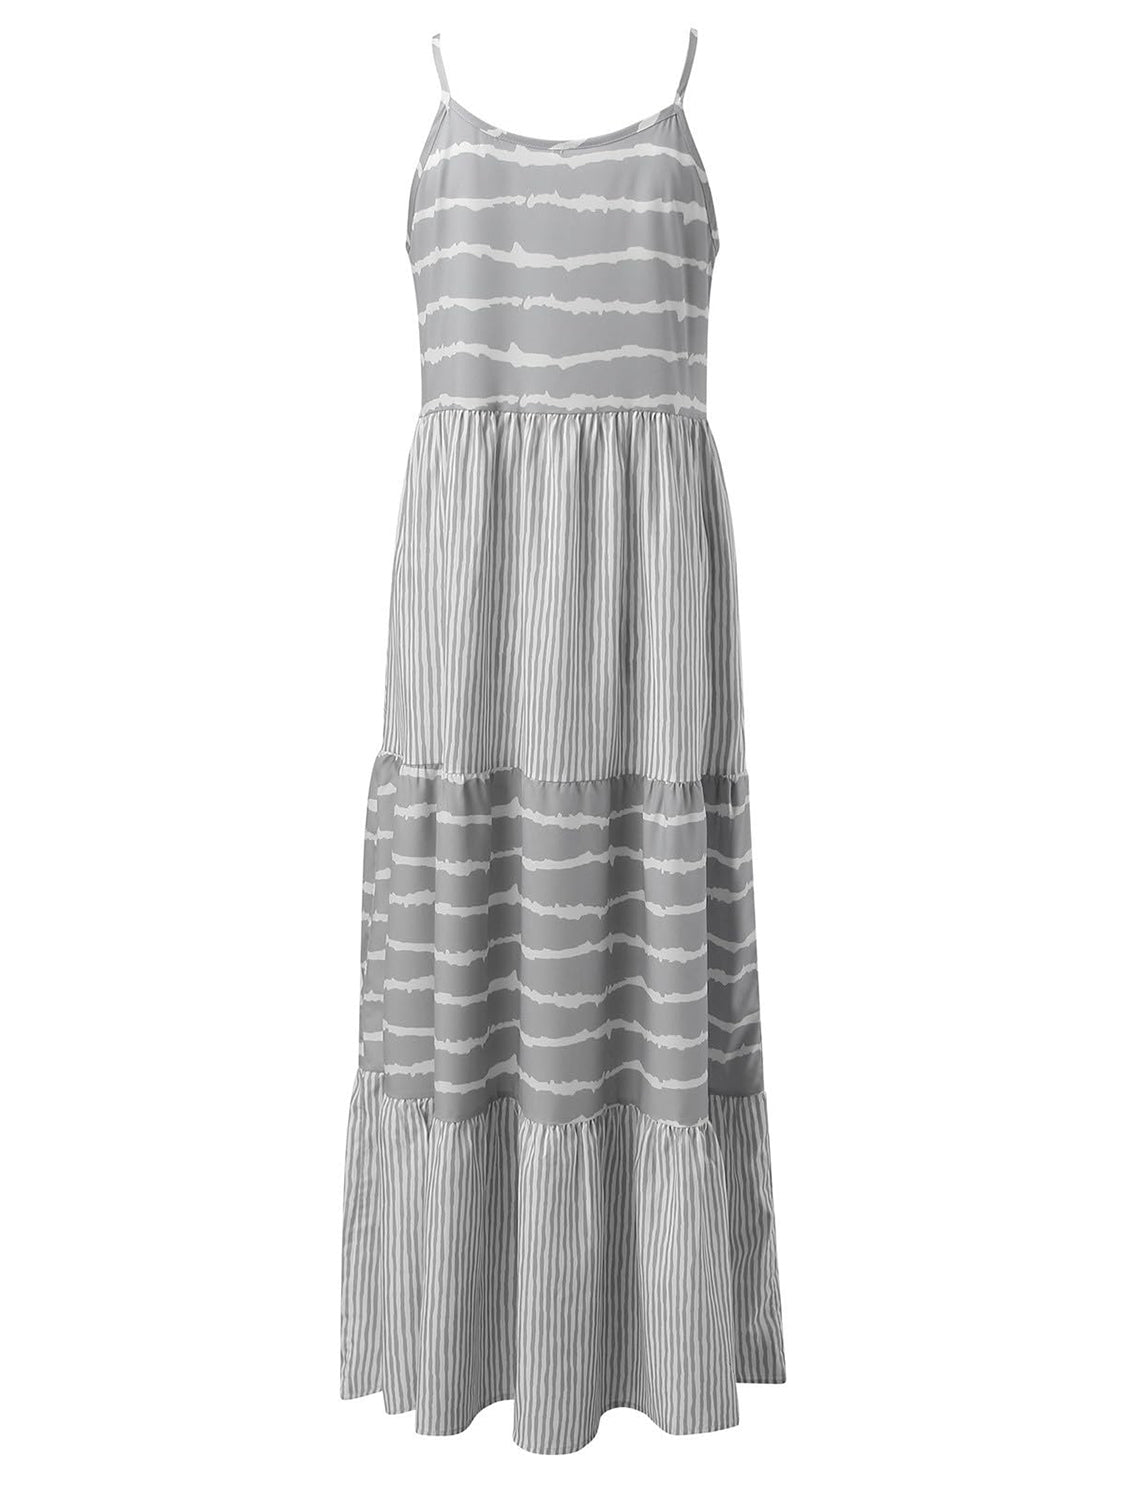 Tiered Striped Sleeveless Cami Dress for Mature Women - Perfect Summer Beach Wedding Guest Attire for Ladies Over 50